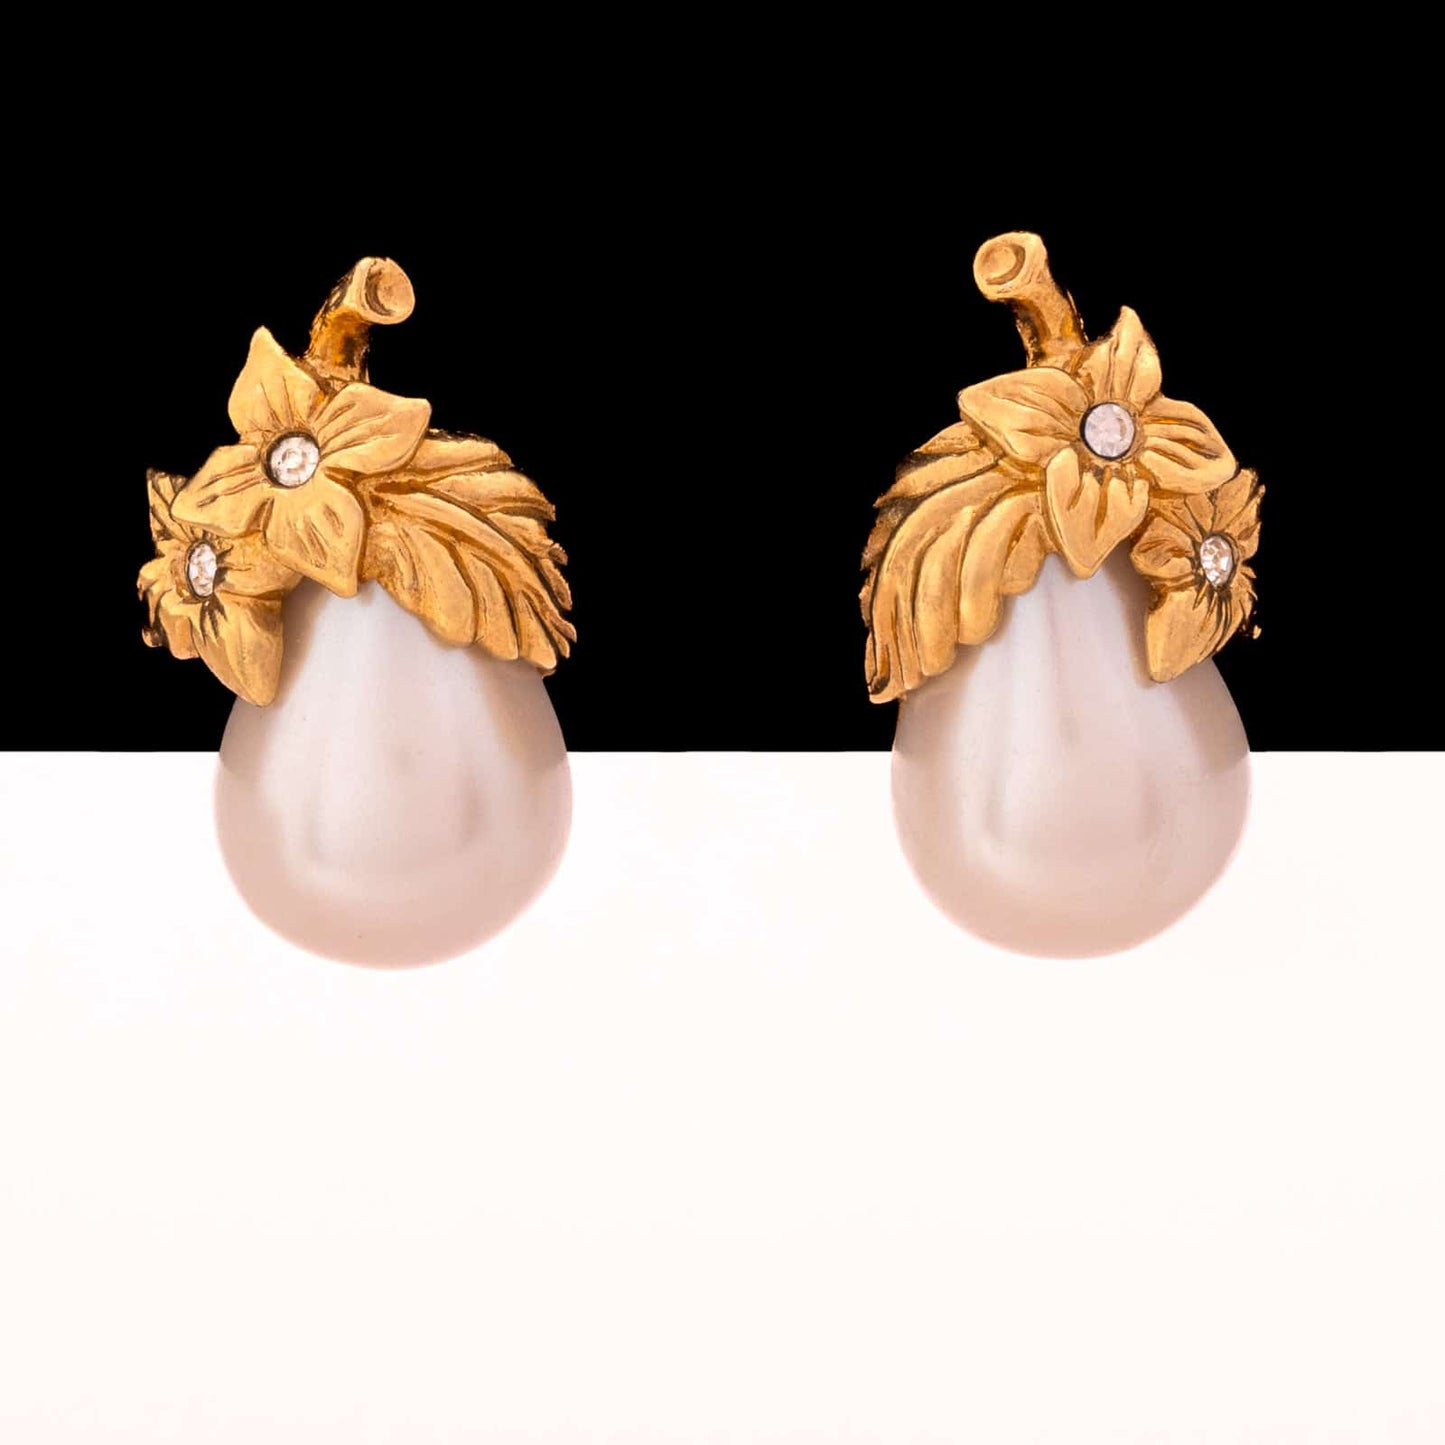 AVON gold-plated pearl earrings in the shape of pears